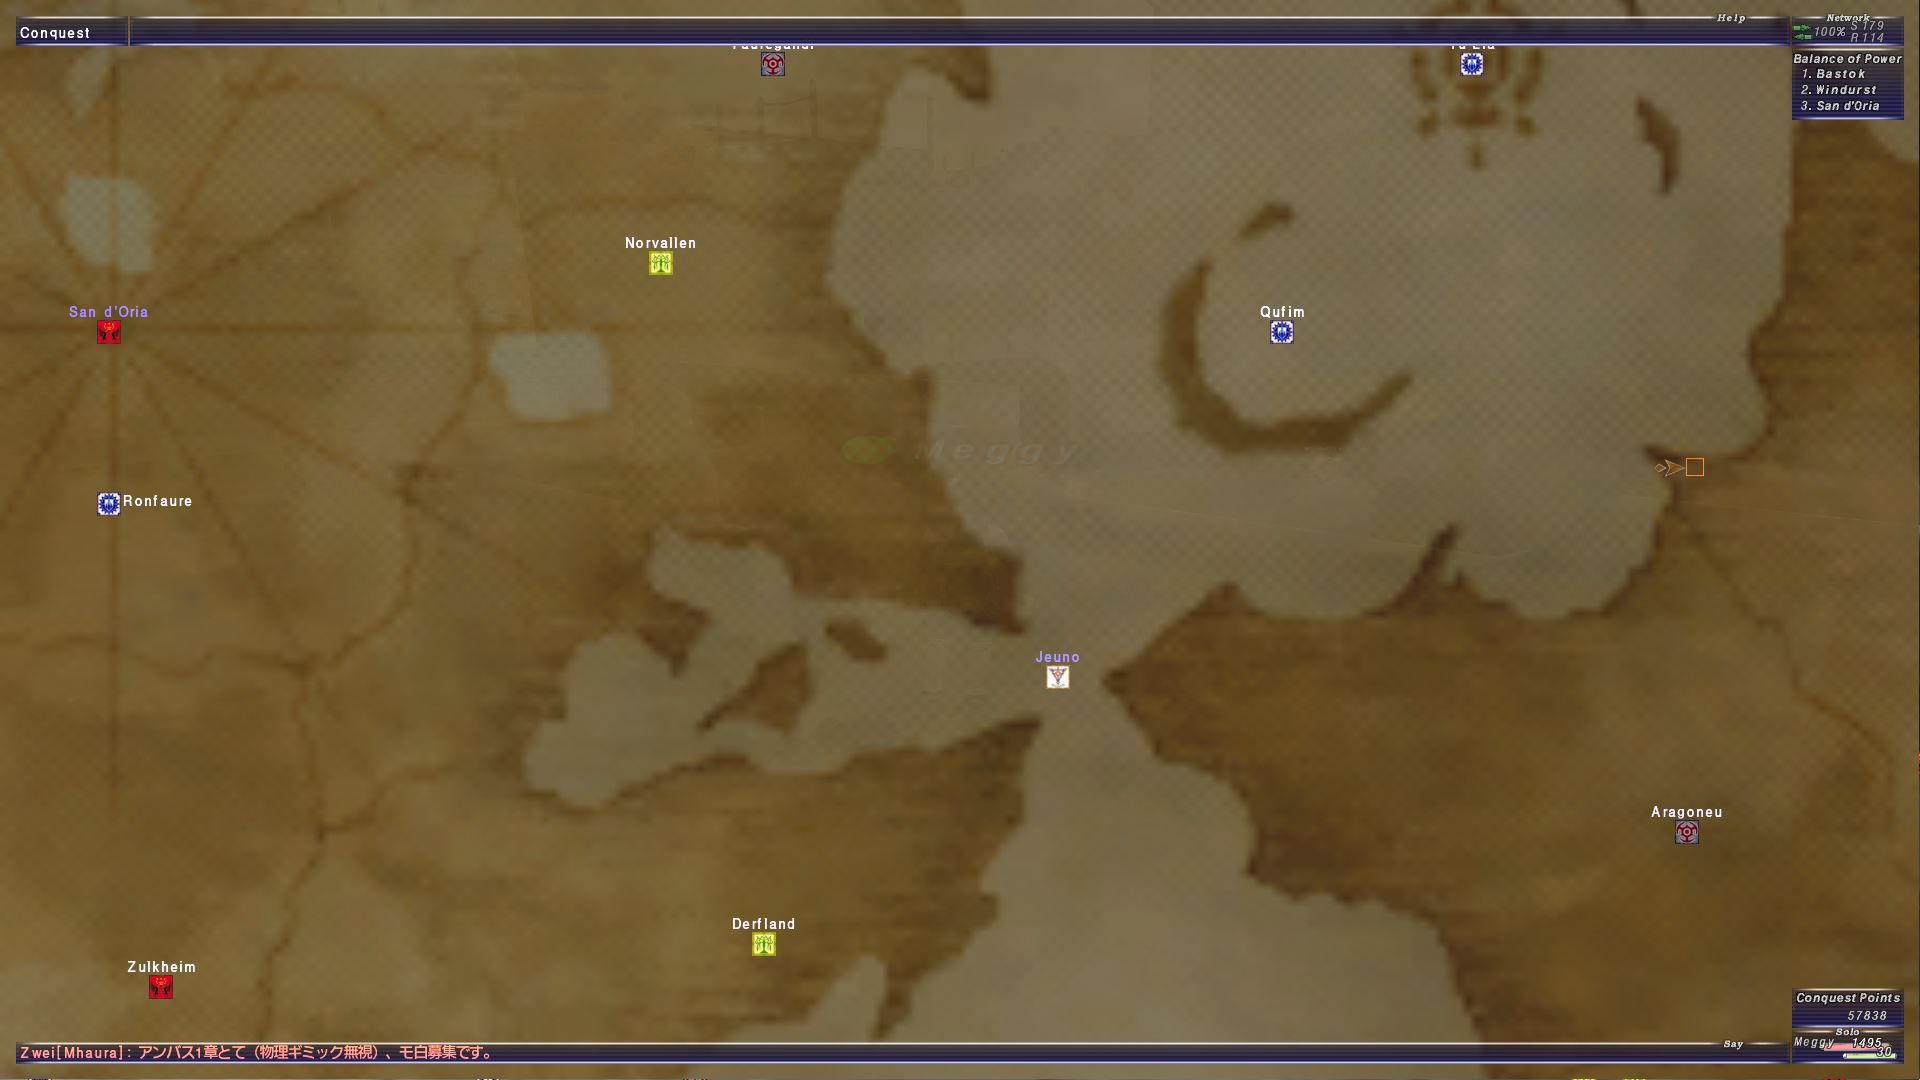 Final Fantasy 11 regional map displaying Conquest rankings.